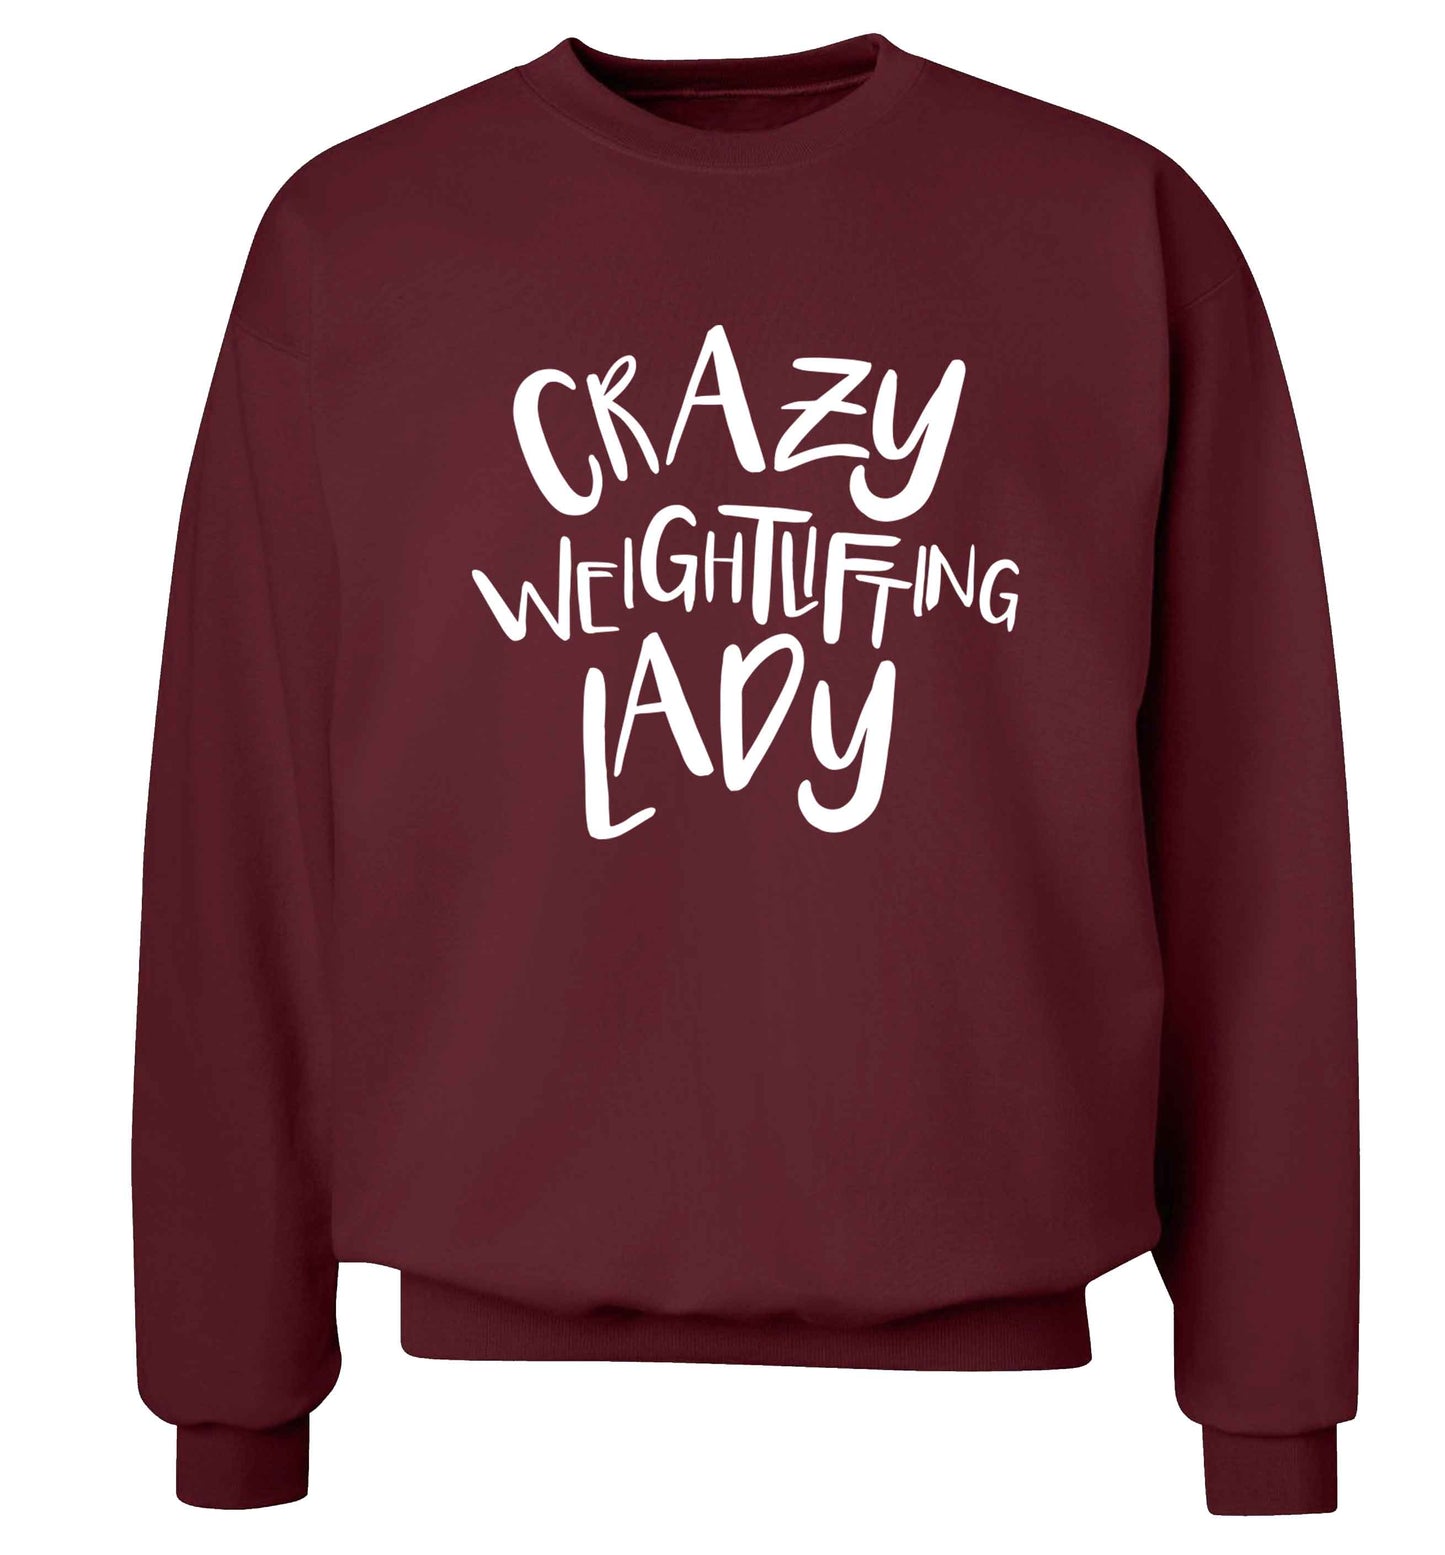 Crazy weightlifting lady Adult's unisex maroon Sweater 2XL